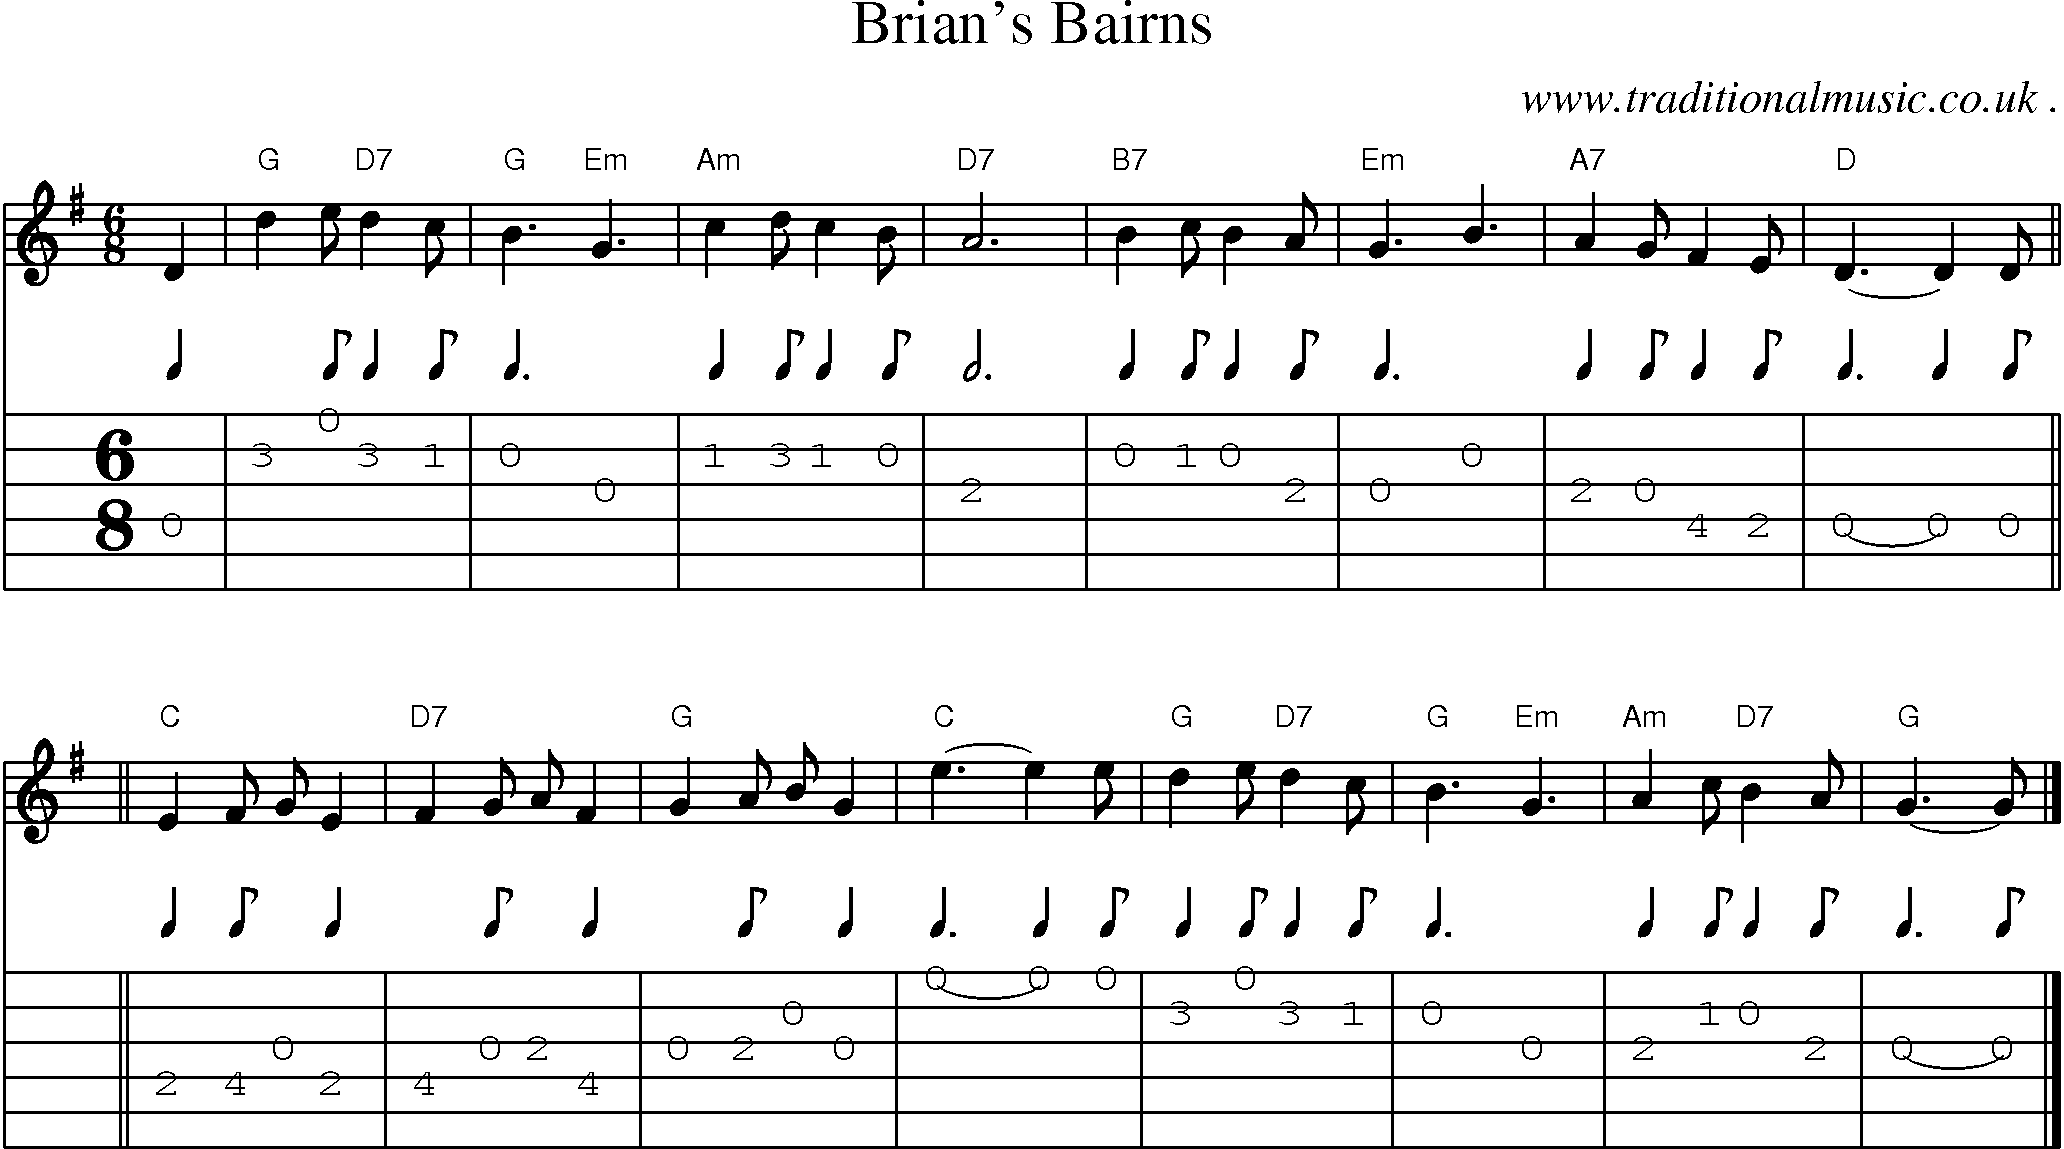 Sheet-music  score, Chords and Guitar Tabs for Brians Bairns